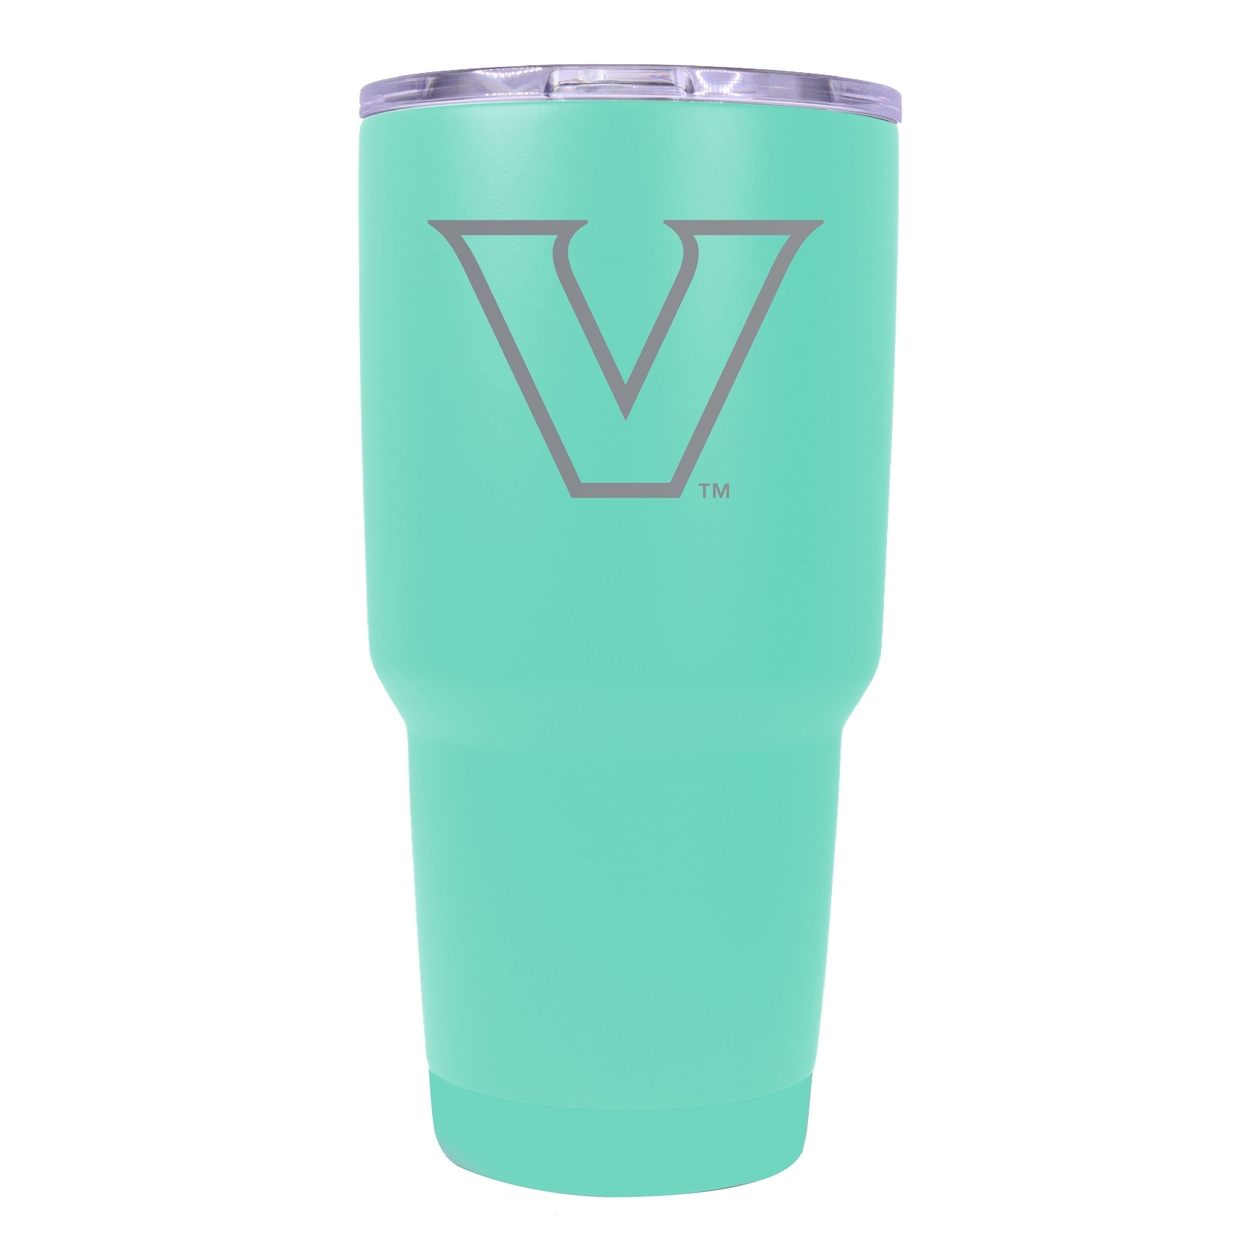 Winthrop University 24 Oz Laser Engraved Stainless Steel Insulated Tumbler - Choose Your Color. - Seafoam